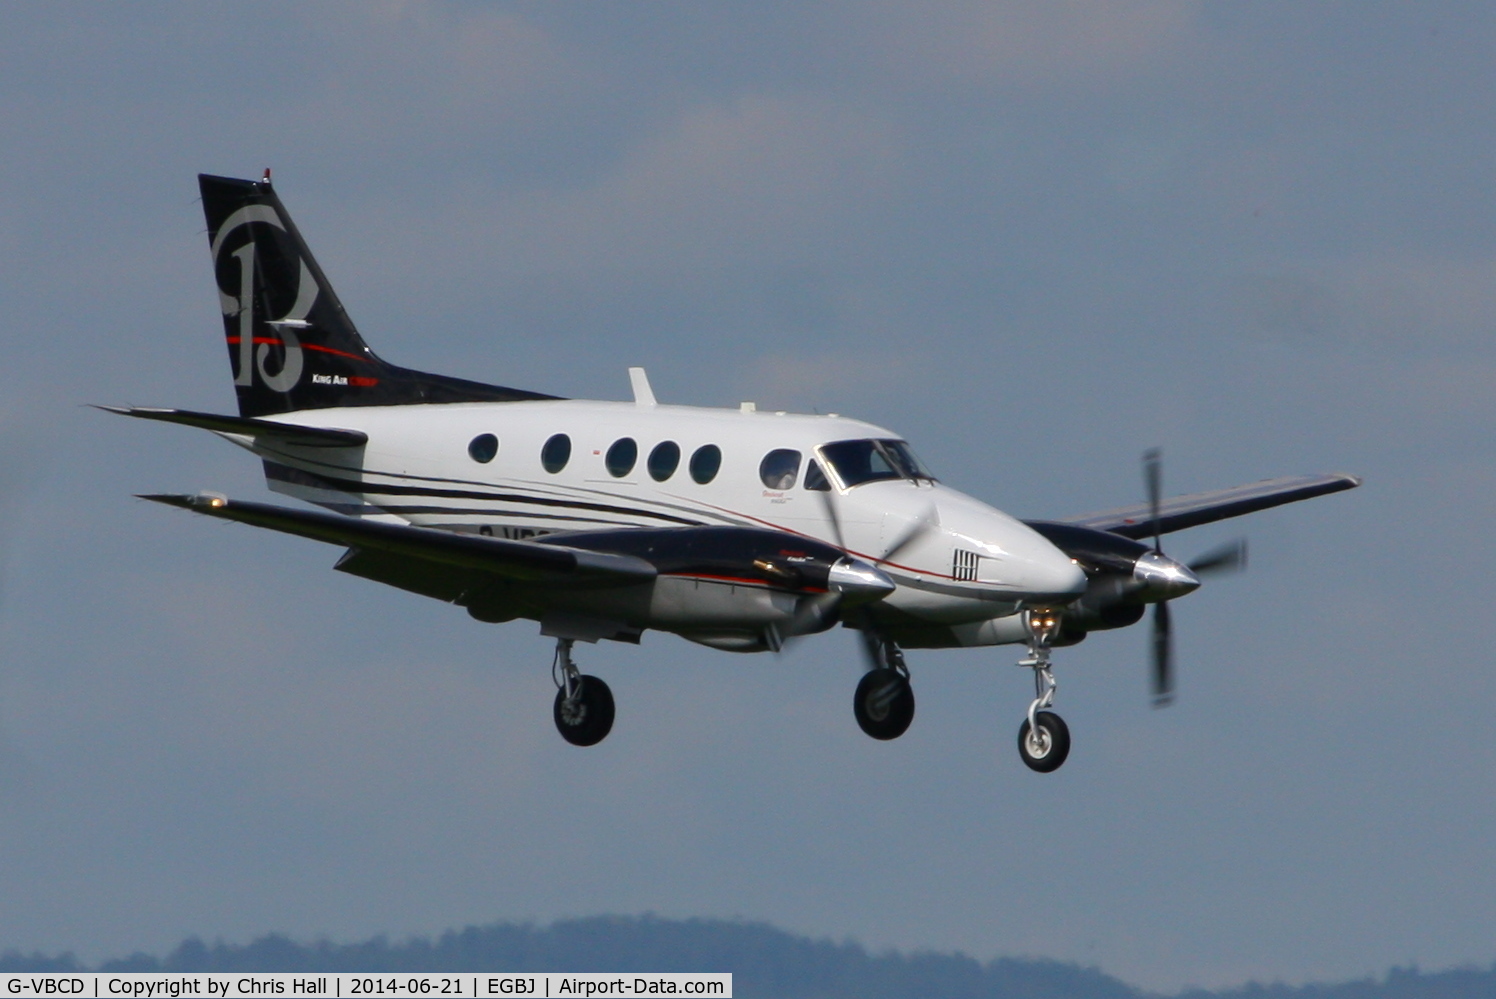 G-VBCD, 1981 Beech C90 King Air C/N LJ-972, Visitor for Project Propeller 2014